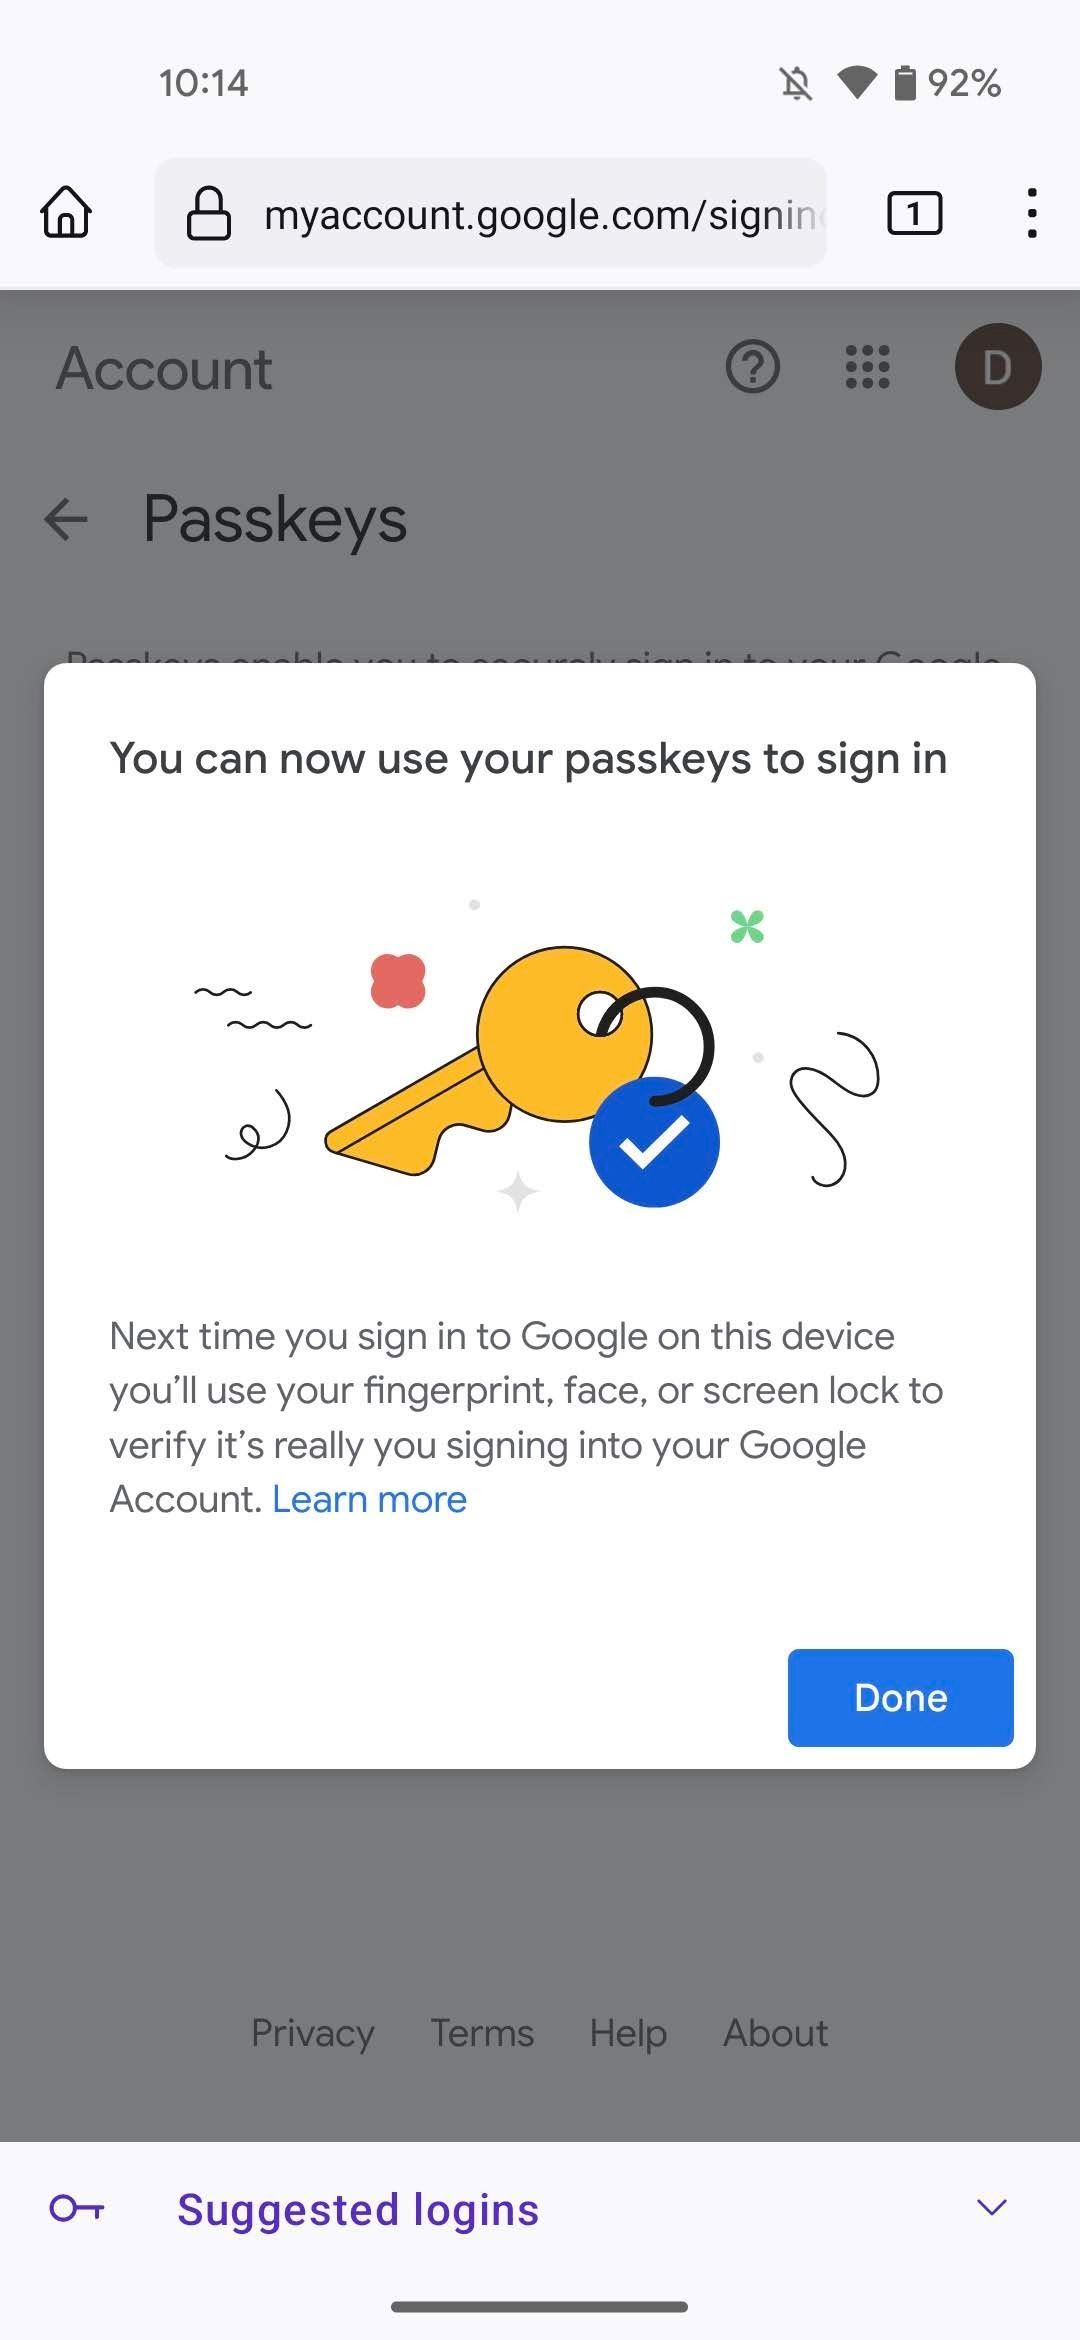 A prompt stating that you can now use your passwords to sign in to a Google account